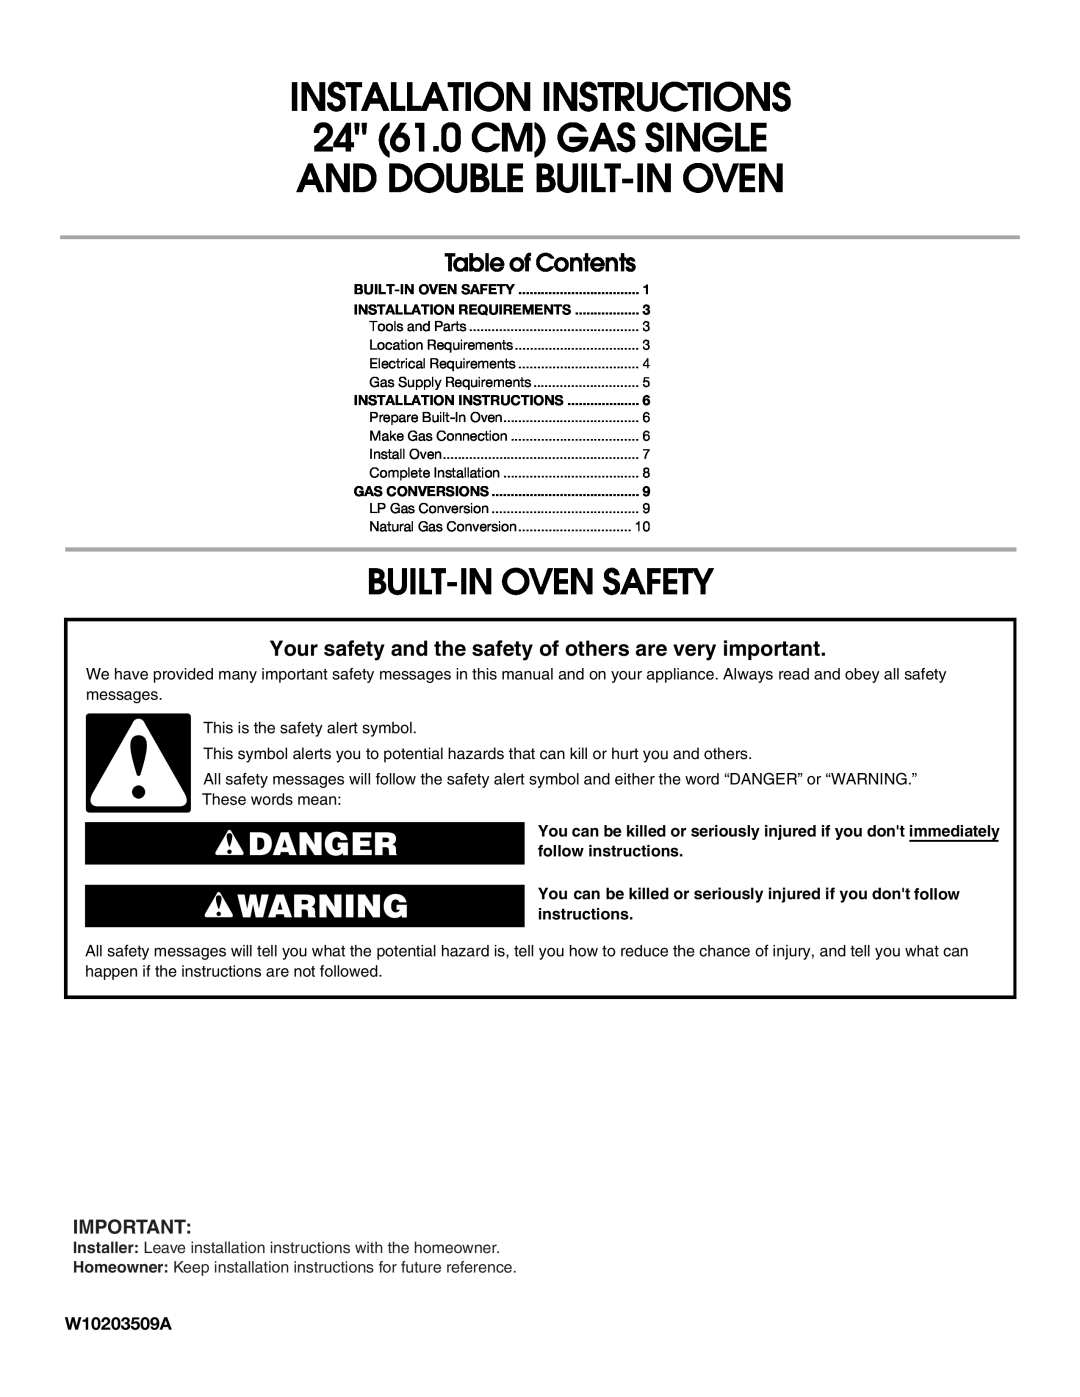 Whirlpool Gas Single And Double Built-In Oven installation instructions Built-Inoven Safety, Danger, Table of Contents 